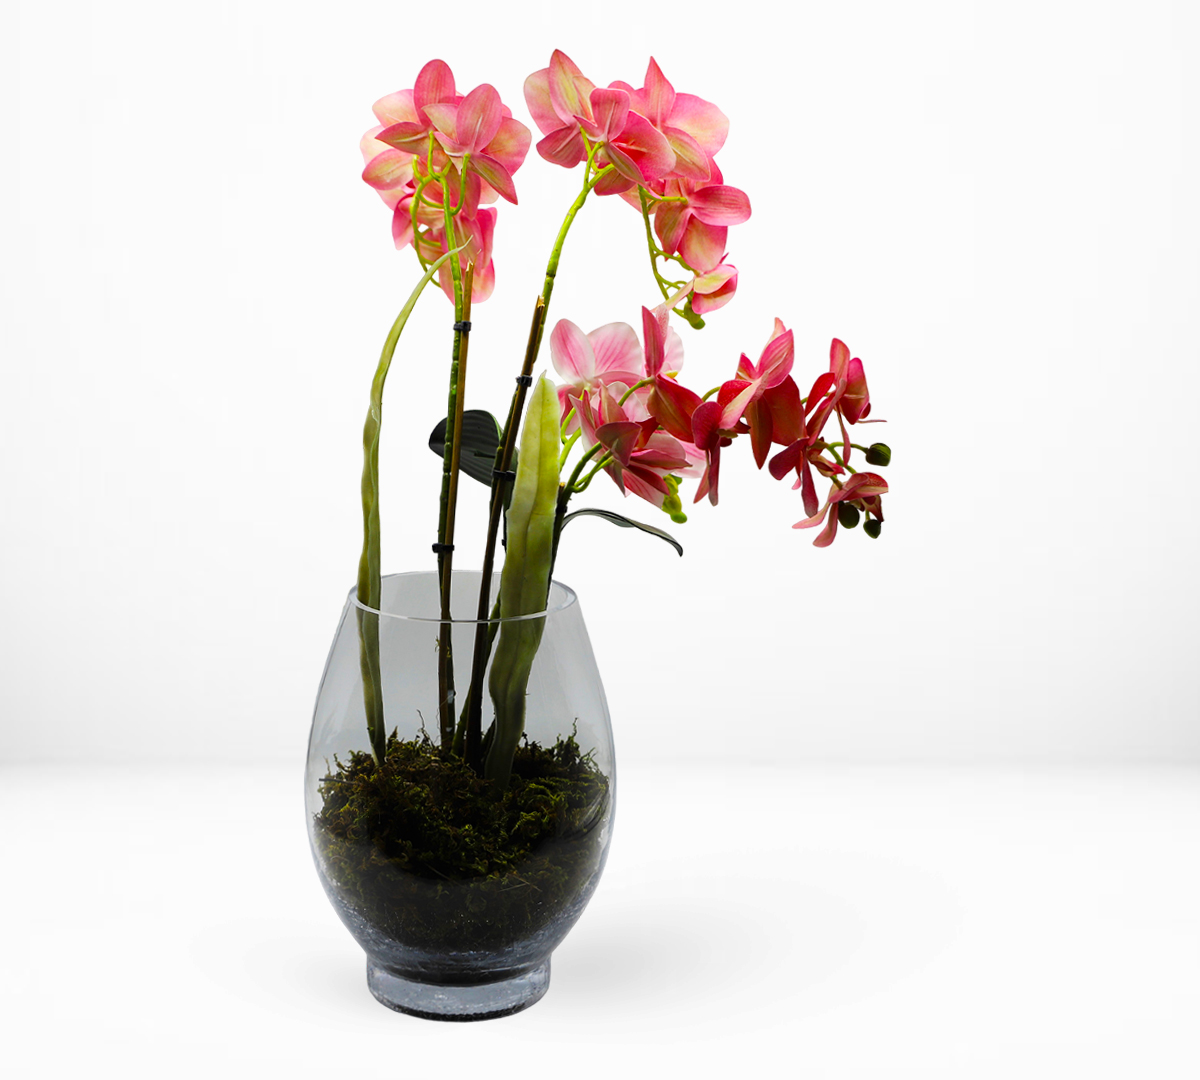 Decorative Glass Vase Filled with Artificial Flowers - Hand Arranged